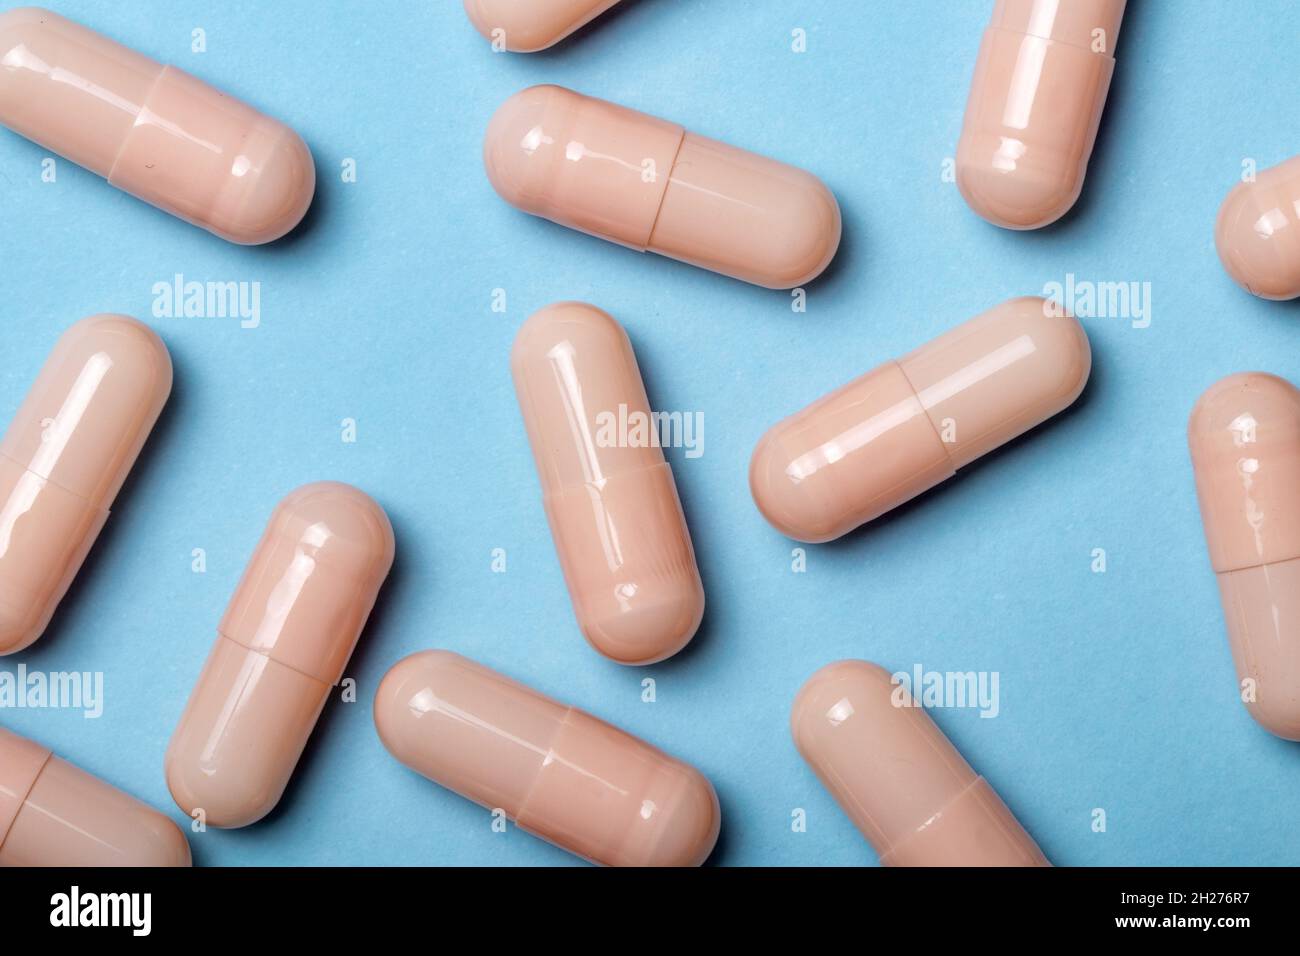 Top view photo of pills, medicines and capsules. Stock Photo